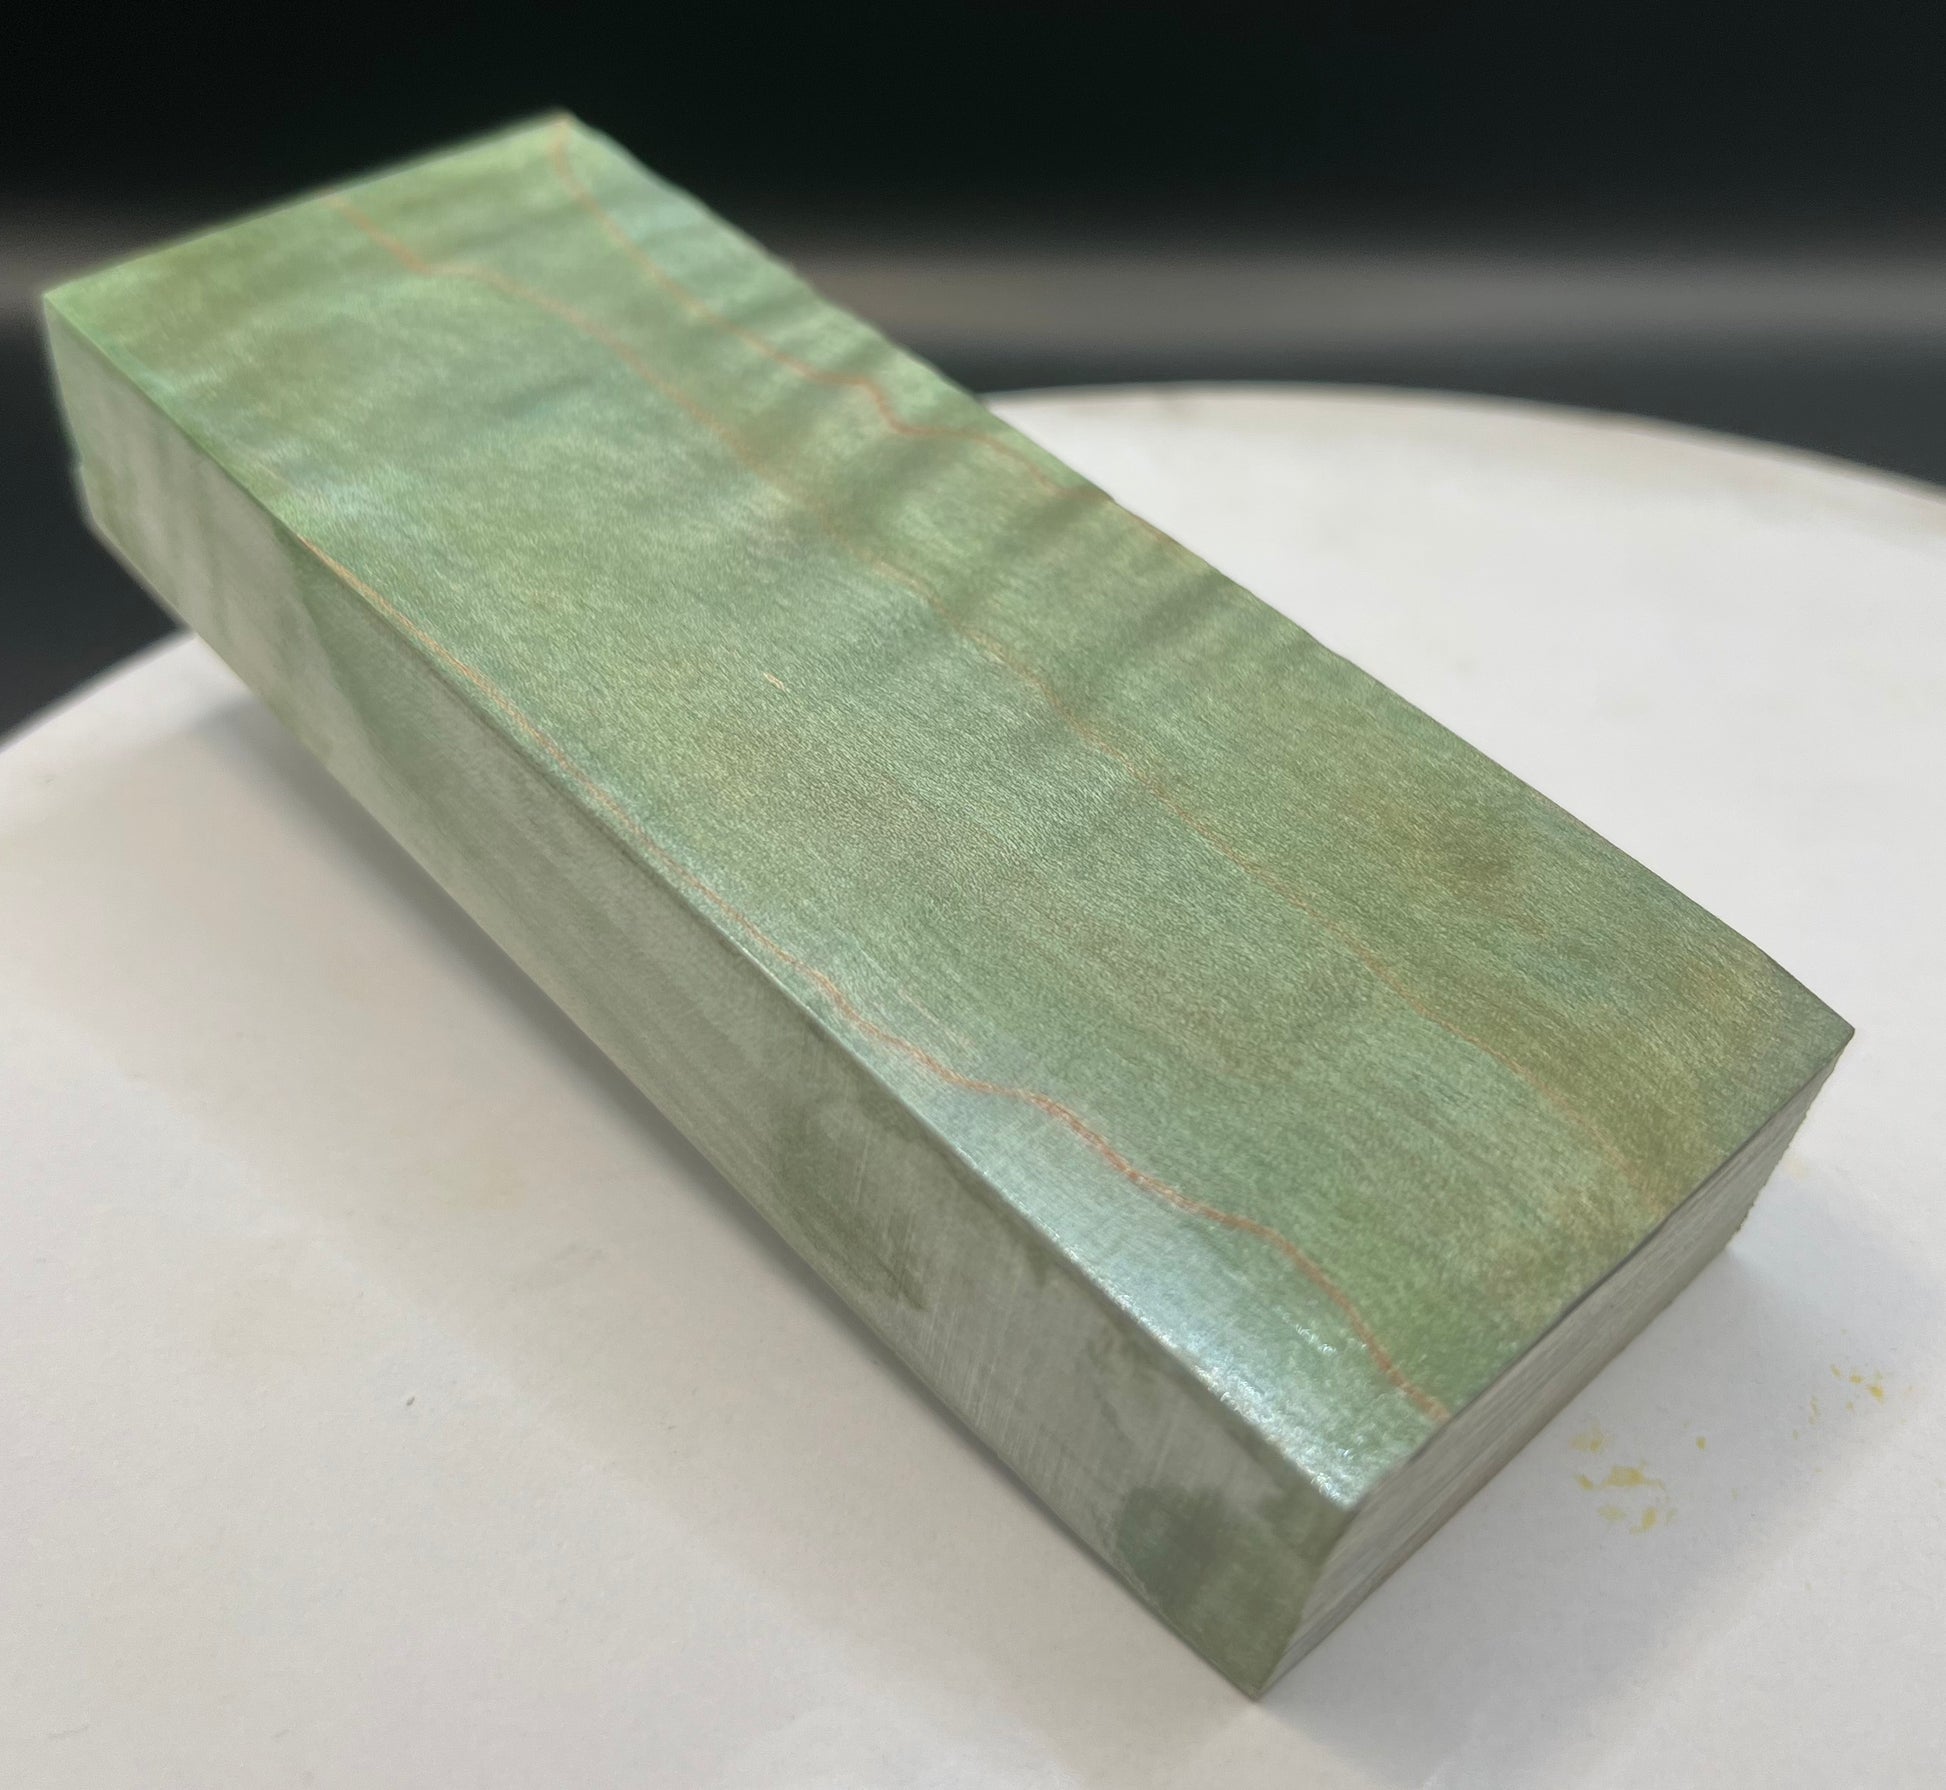 Stabilized Curly Maple Knife Block Emerald Green